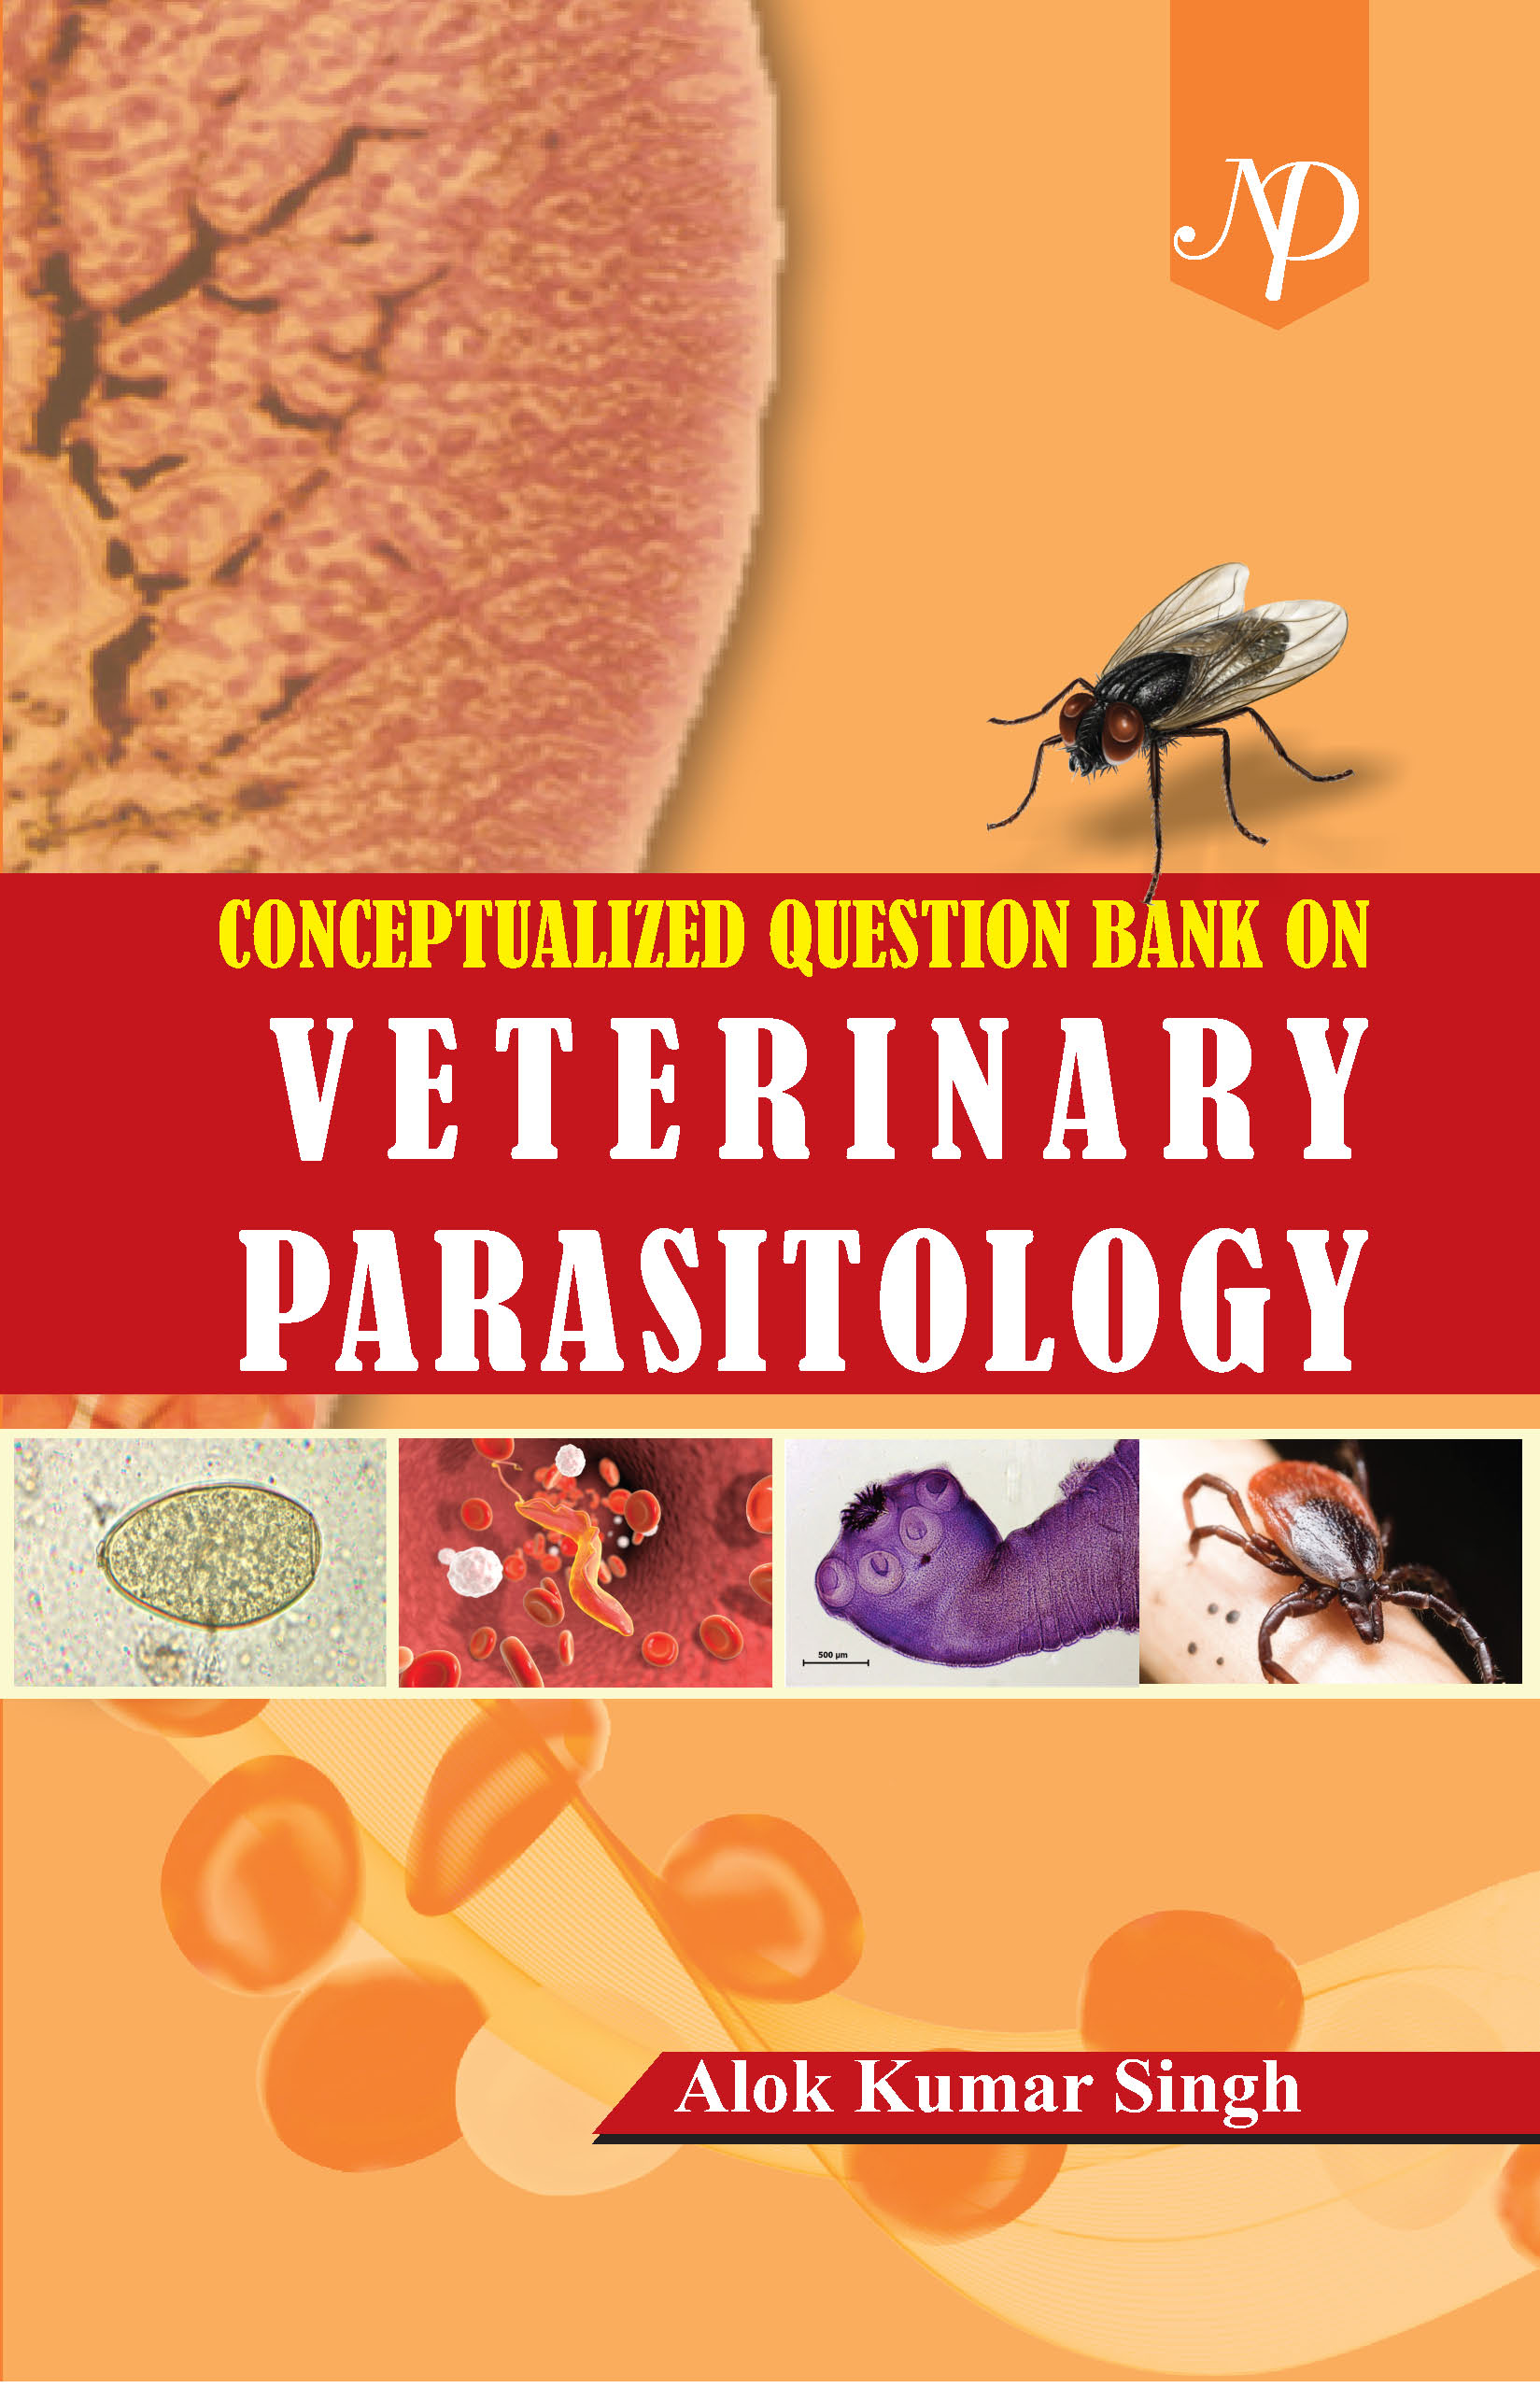 Conceptualized Question Bank on Veterinary Cover.jpg